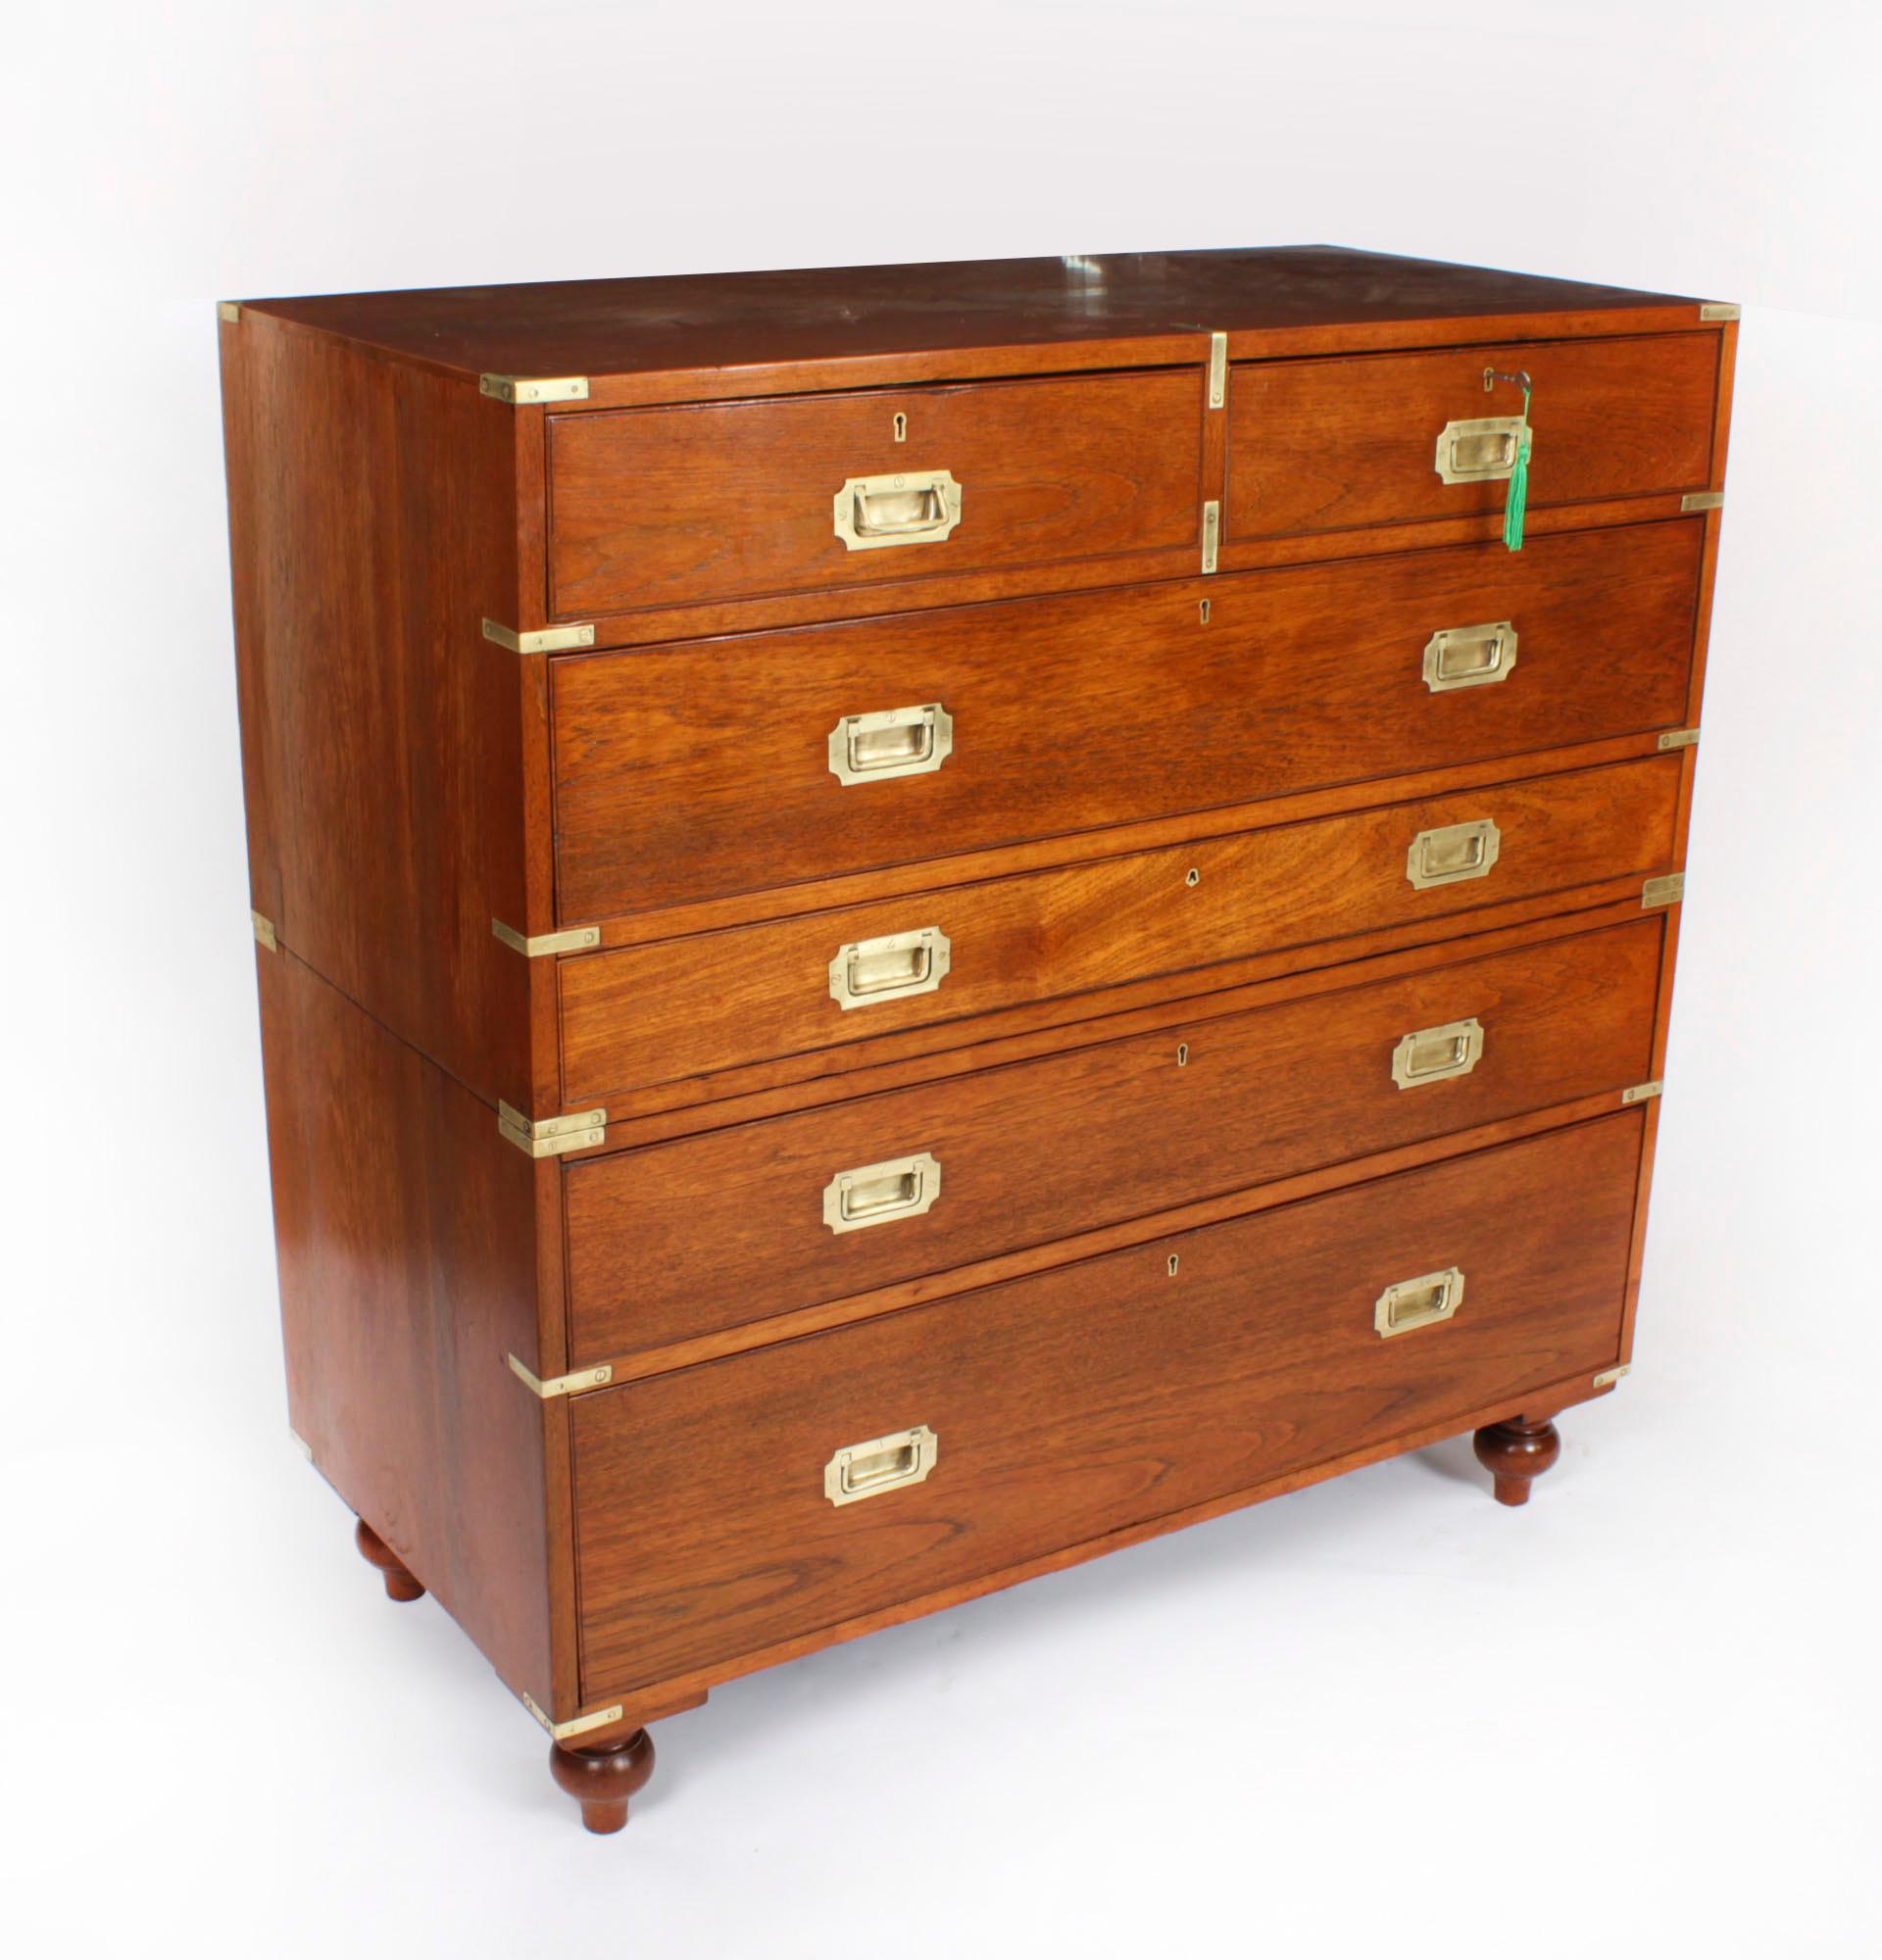 This is beautifully crafted antique early Victorian teak military secretaire chest of drawers, circa 1840 in date.

The chest freatures two half width drawers over a full width drawer above a shallow drawer that is fitted with birds eye maple